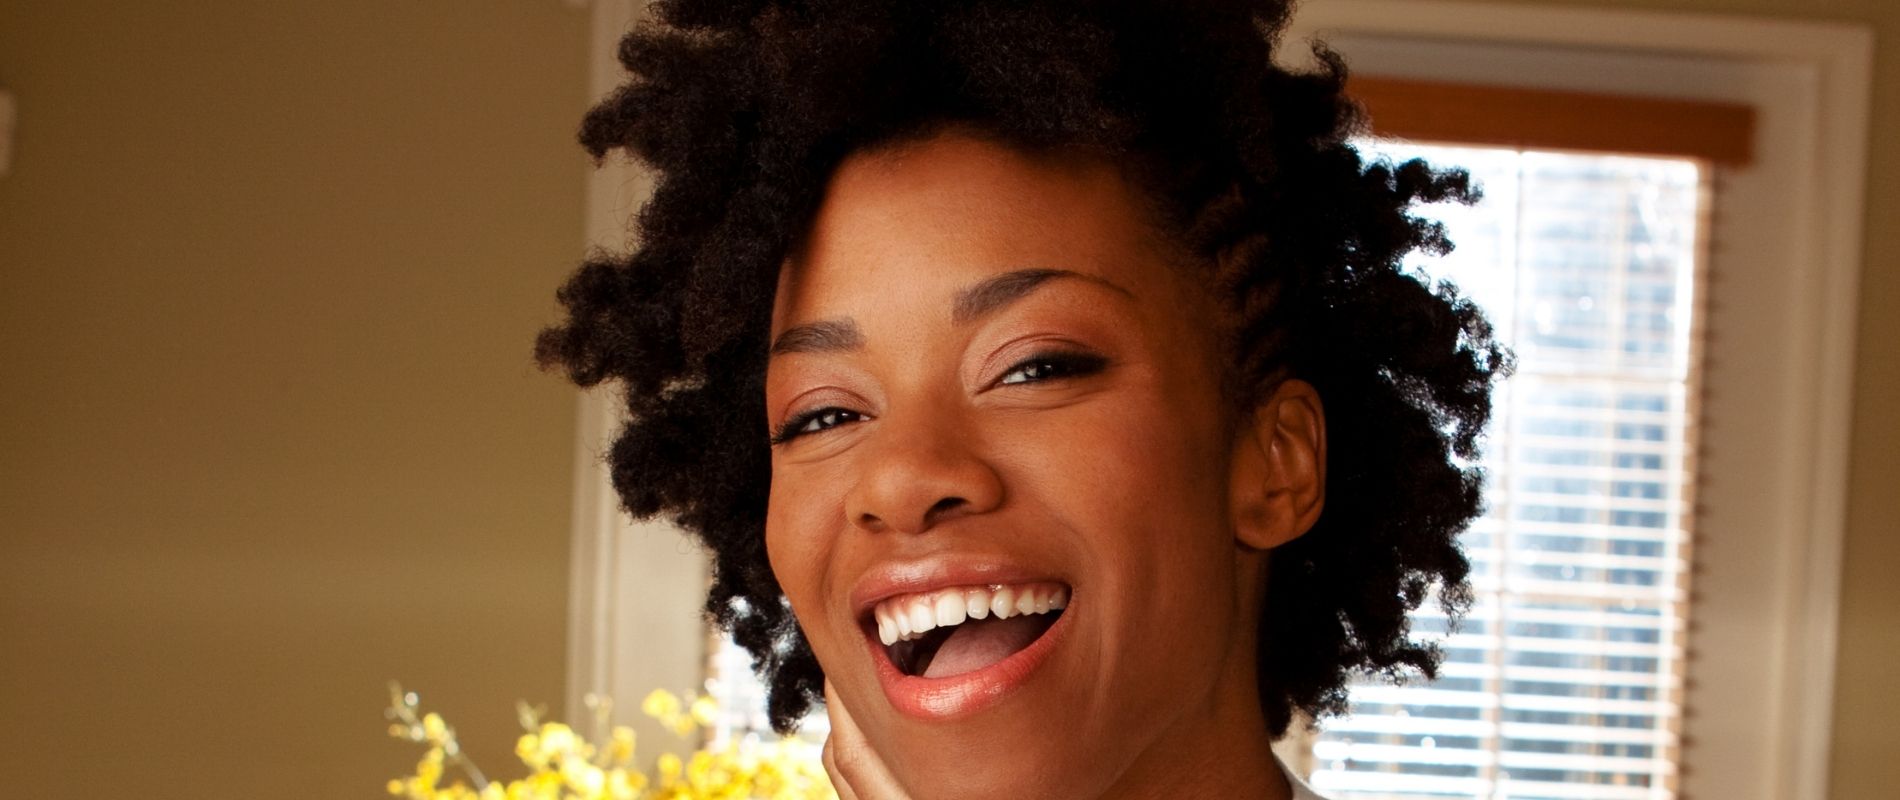 How To Build a Natural Hair Regimen